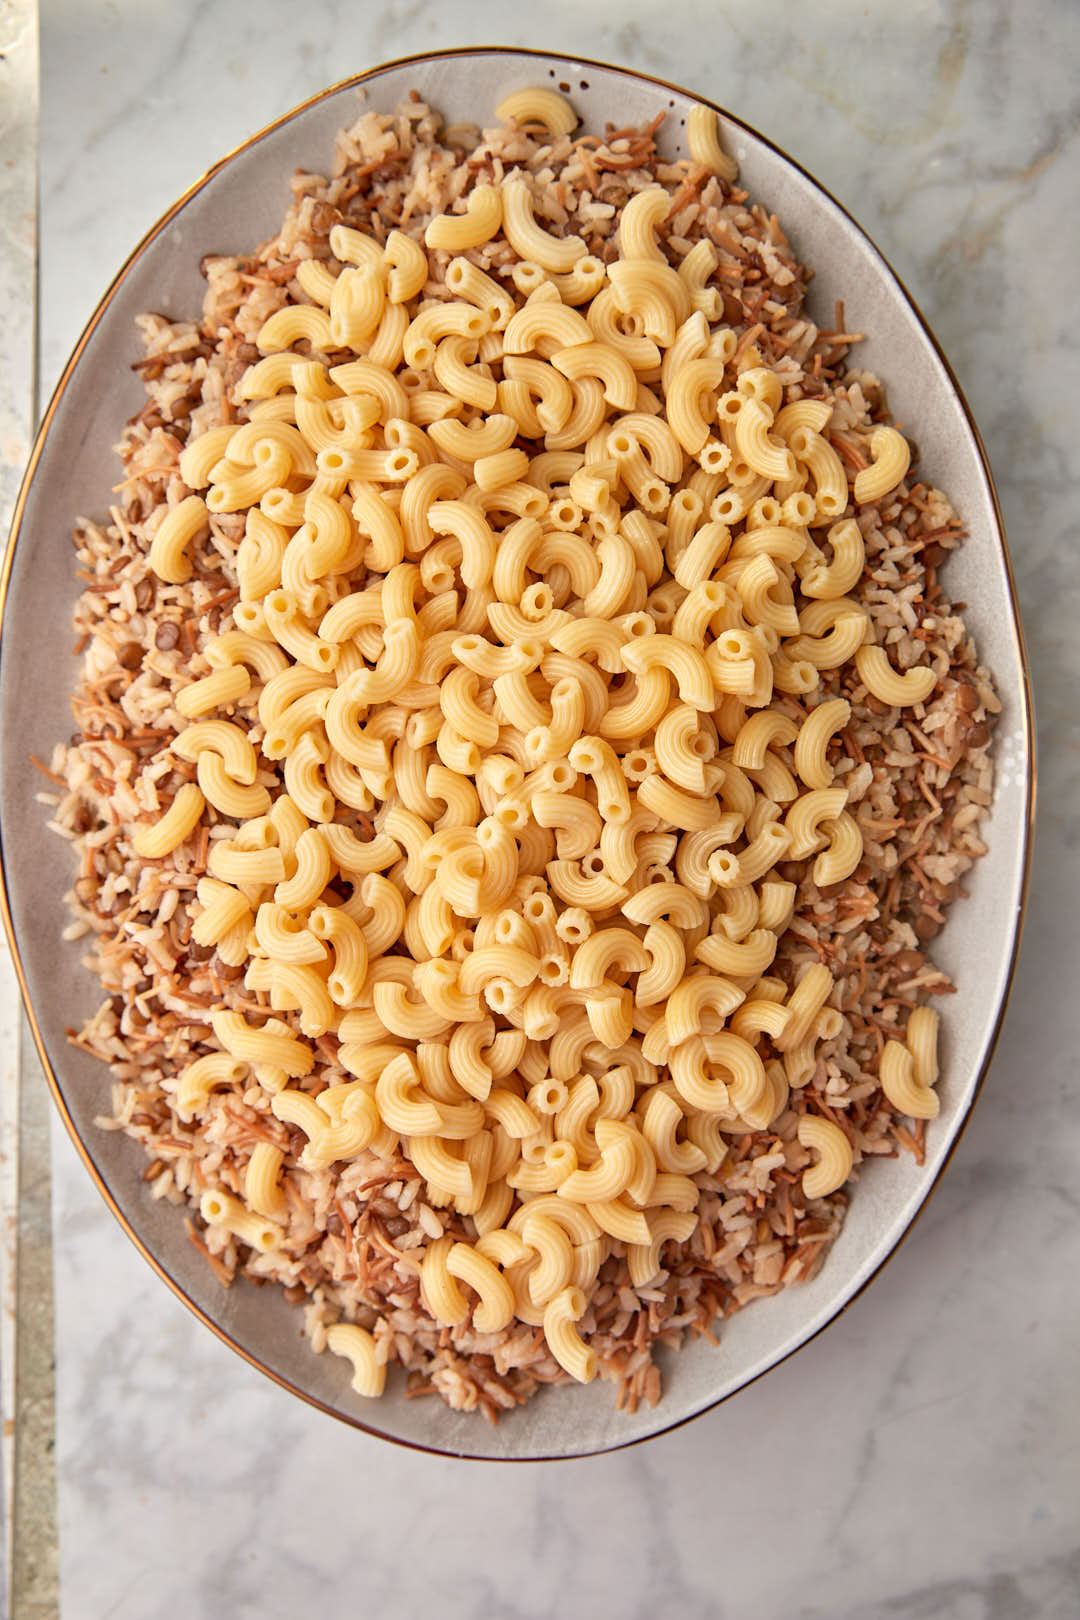 Elbow macaroni on top of lentils and rice in serving platter.